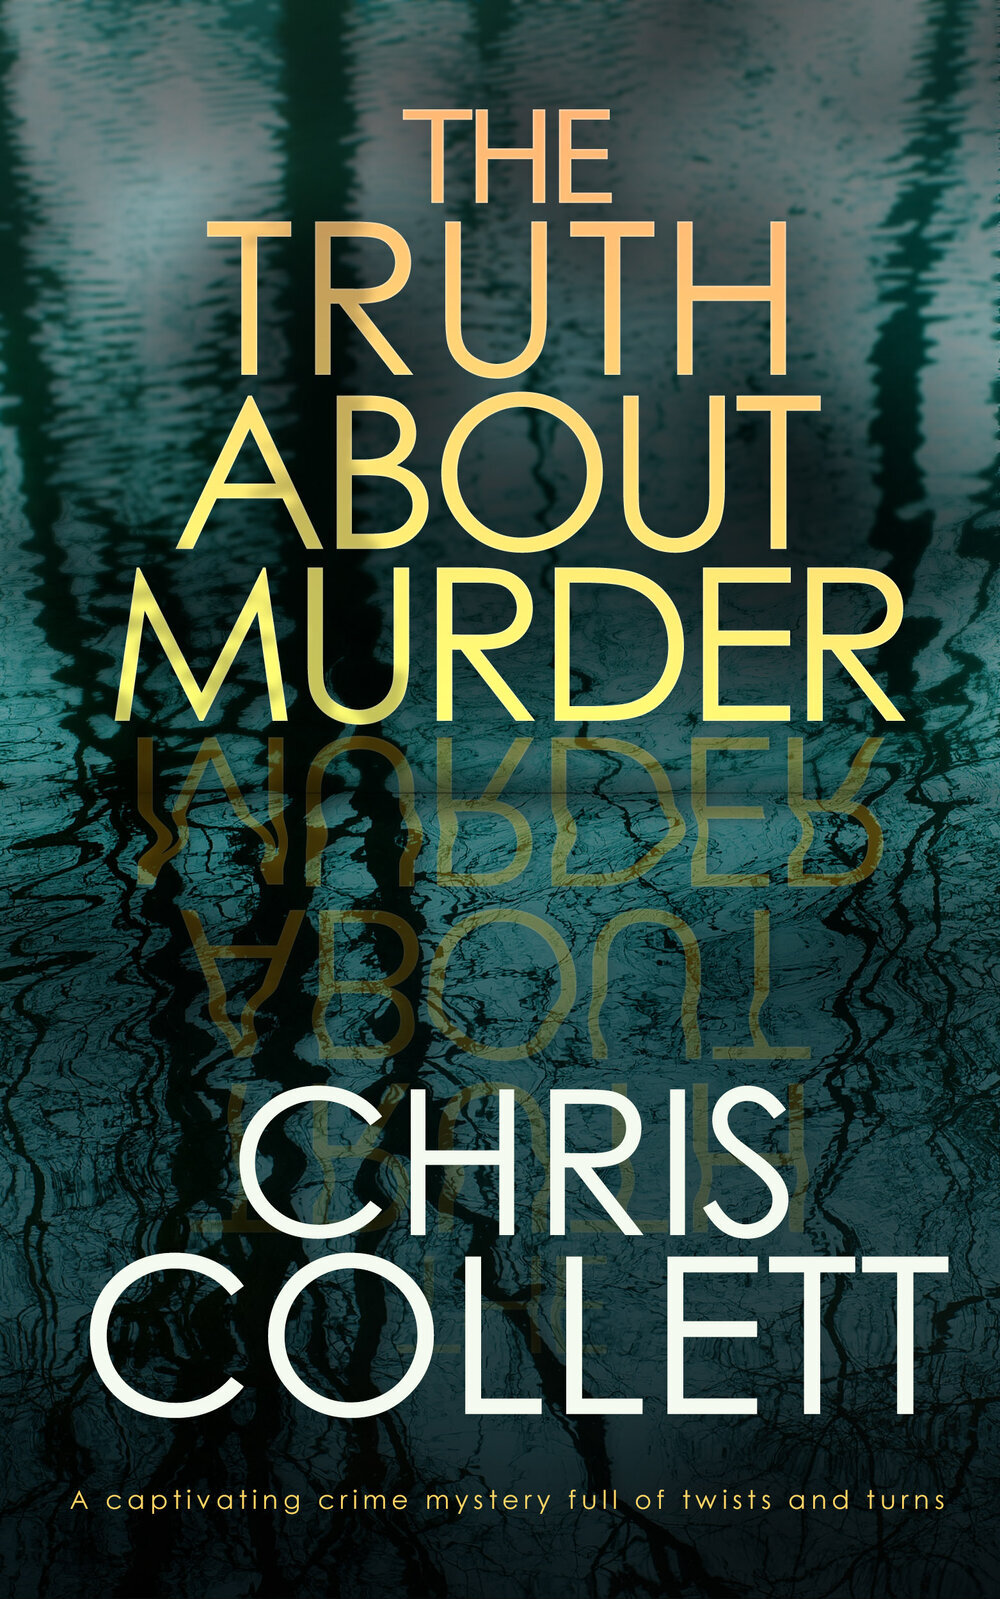 THE+TRUTH+ABOUT+MURDER+PUBLISH+Cover+JJ.jpg